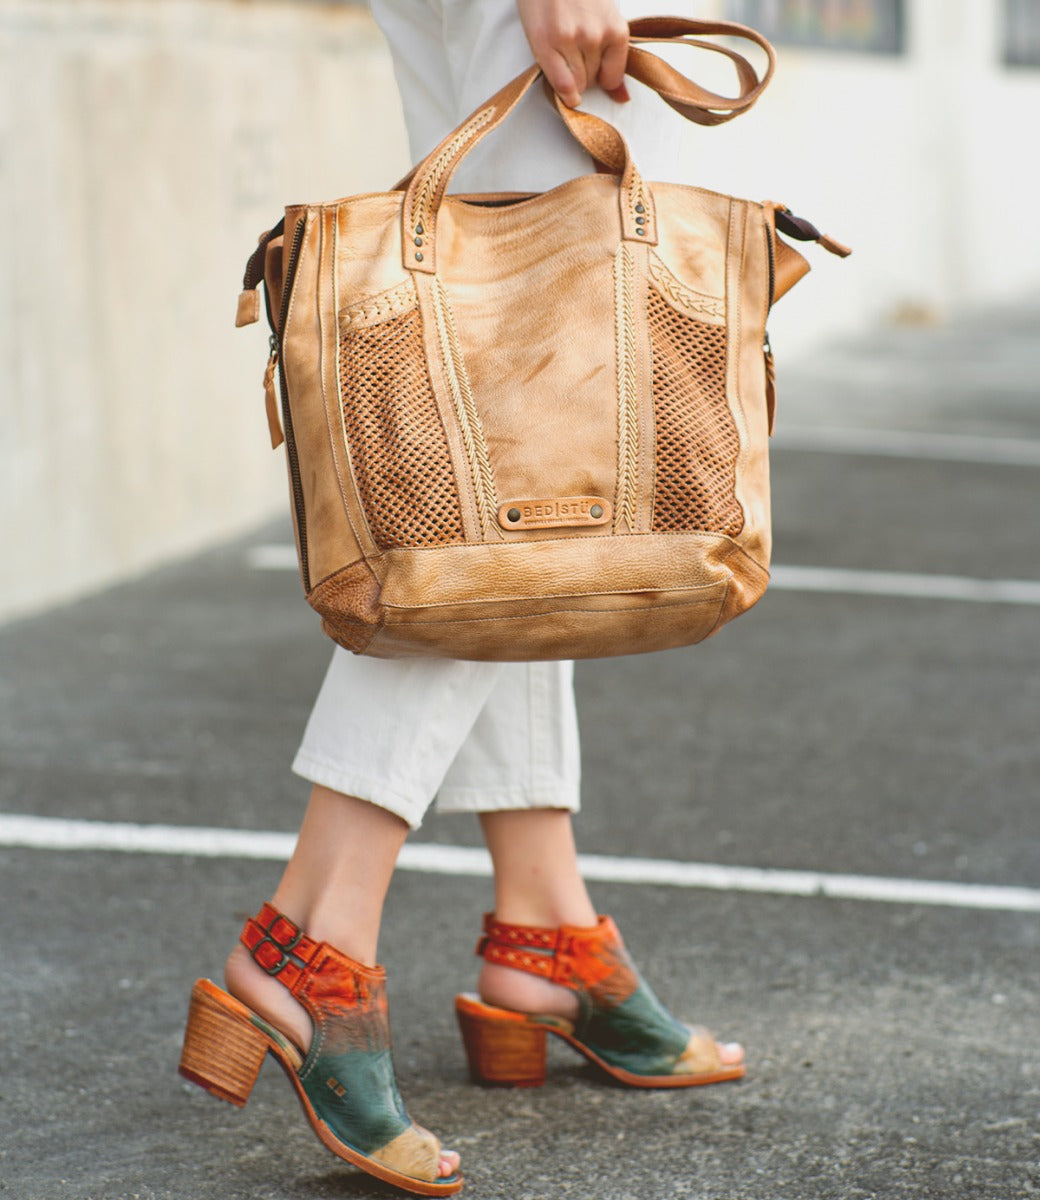 A woman carrying a tan tote bag wearing Ireni shoes by Bed Stu.